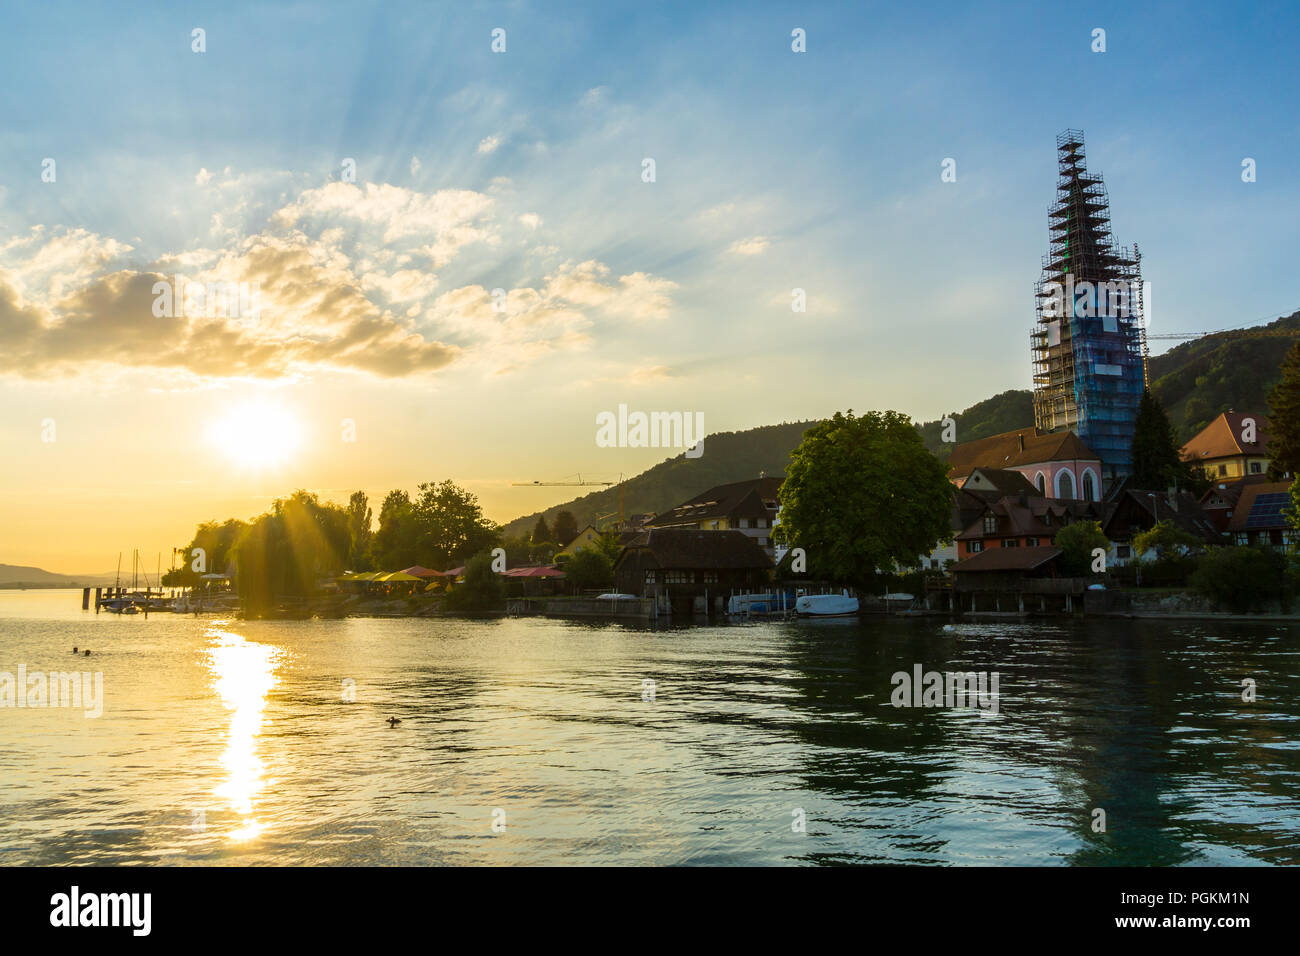 Germany, Little village sipplingen at coast of lake constance at sunset Stock Photo